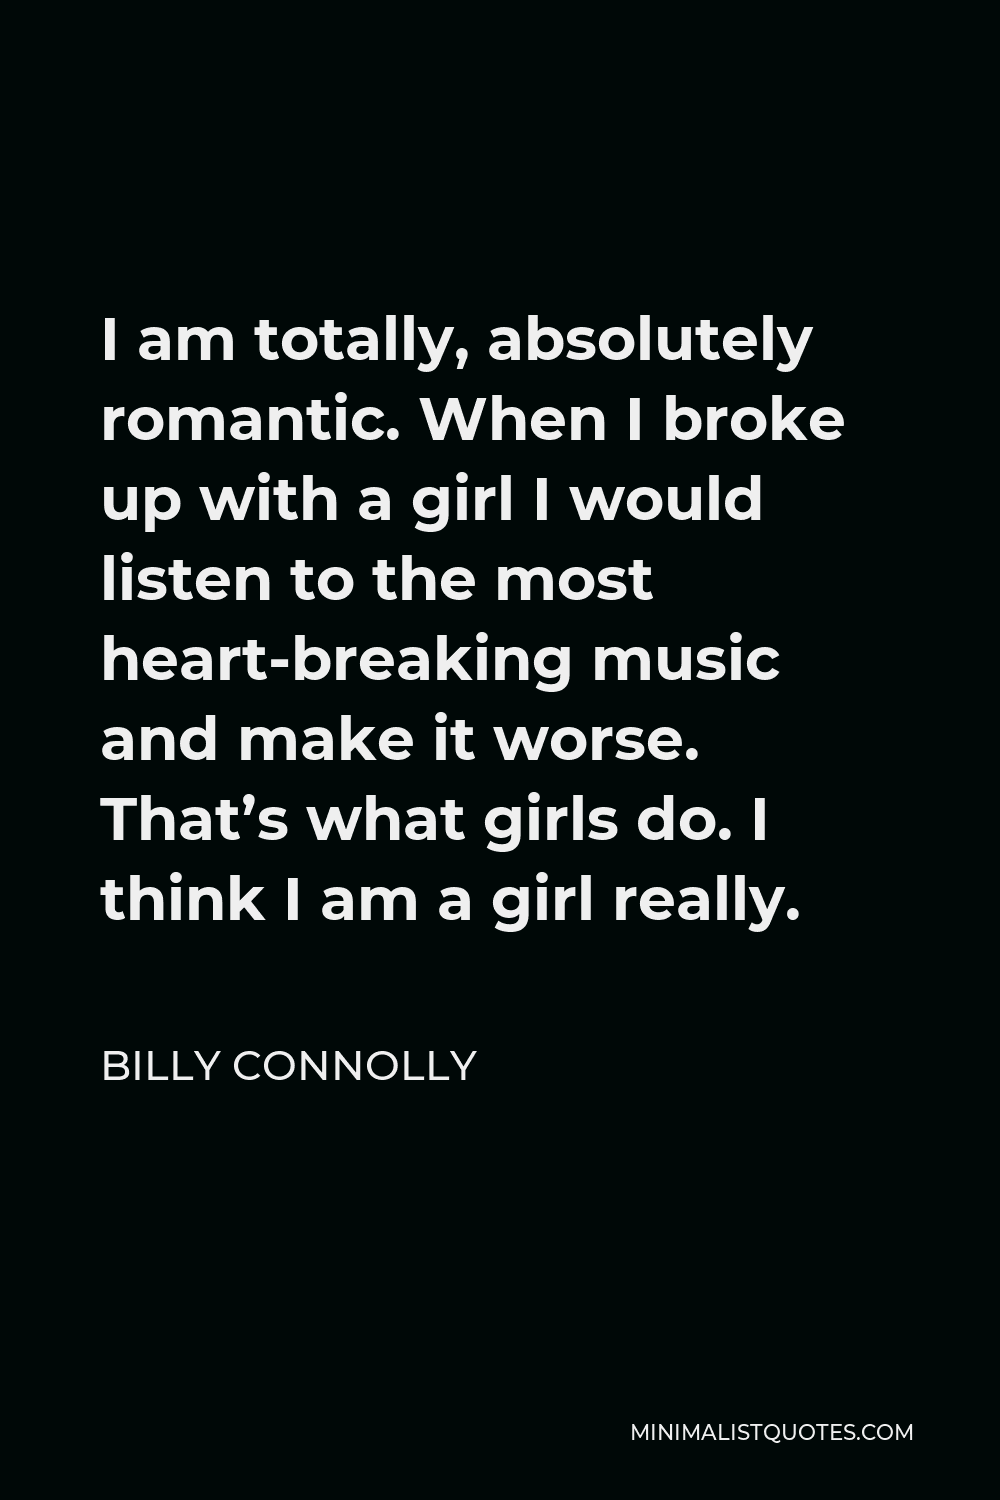 Billy Connolly Quote - I am totally, absolutely romantic. When I broke up with a girl I would listen to the most heart-breaking music and make it worse. That’s what girls do. I think I am a girl really.